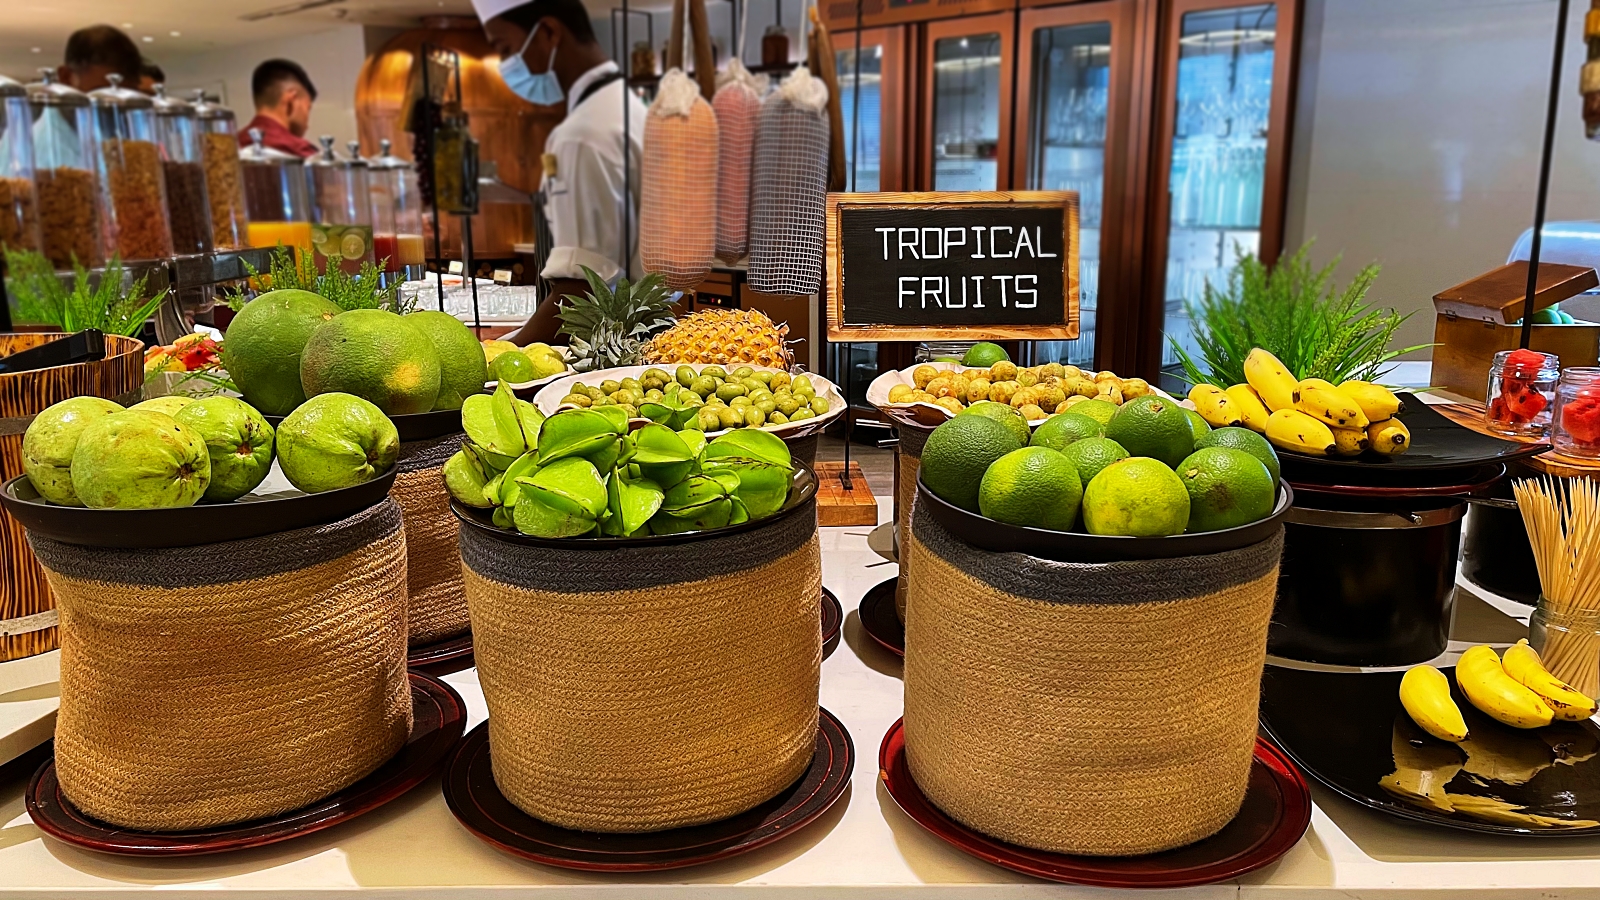 Try these Nutrient Rich Tropical Fruits in Sri Lanka